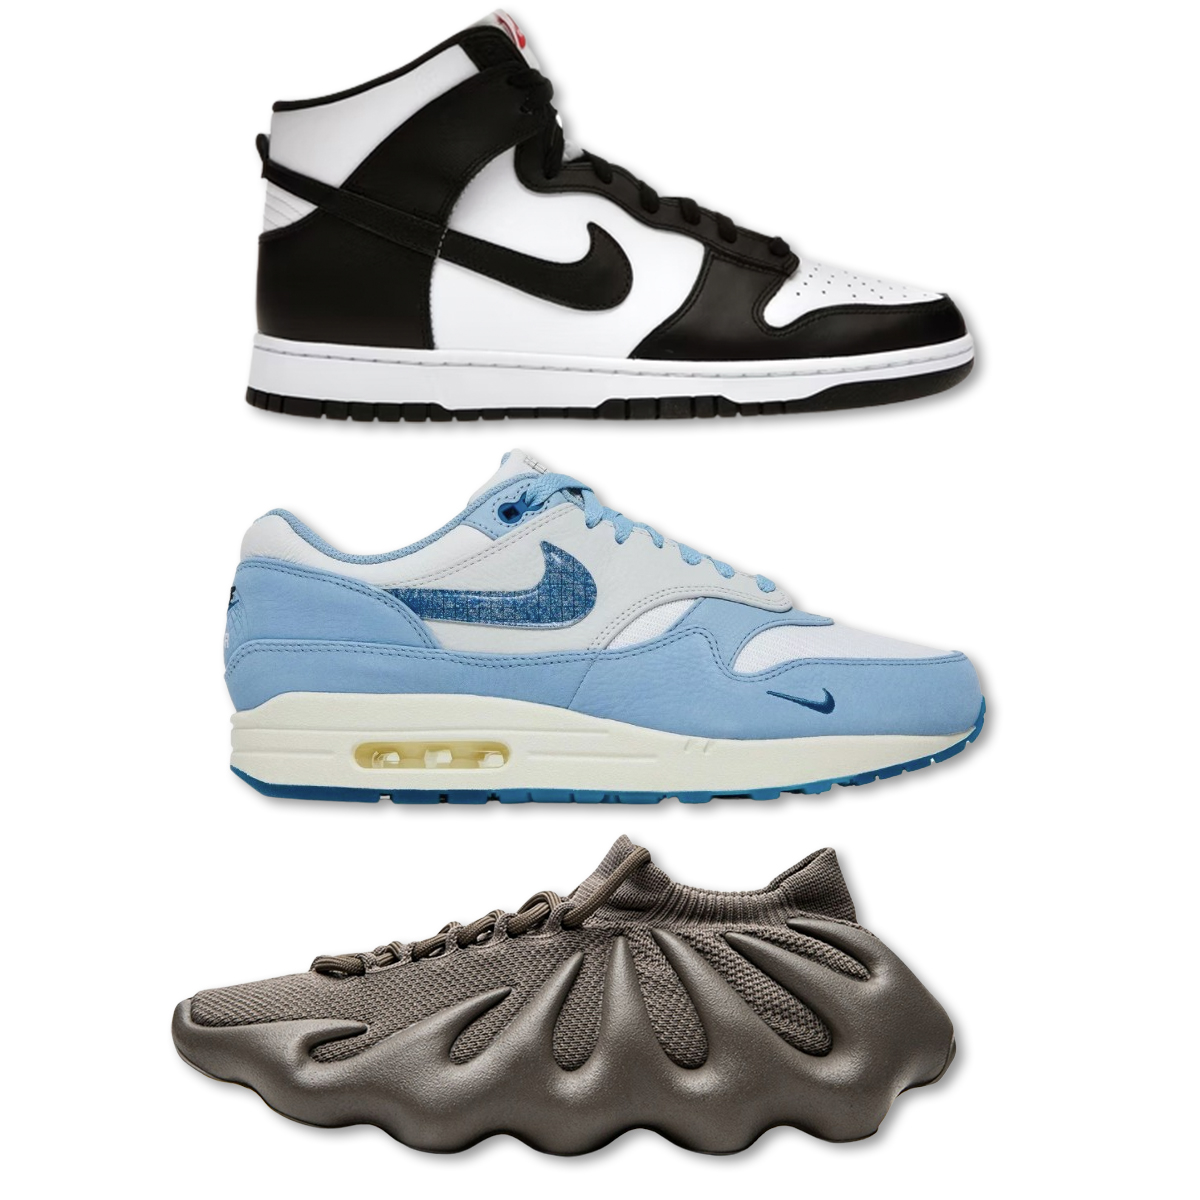 The Best Places to Buy Hype Sneakers Online